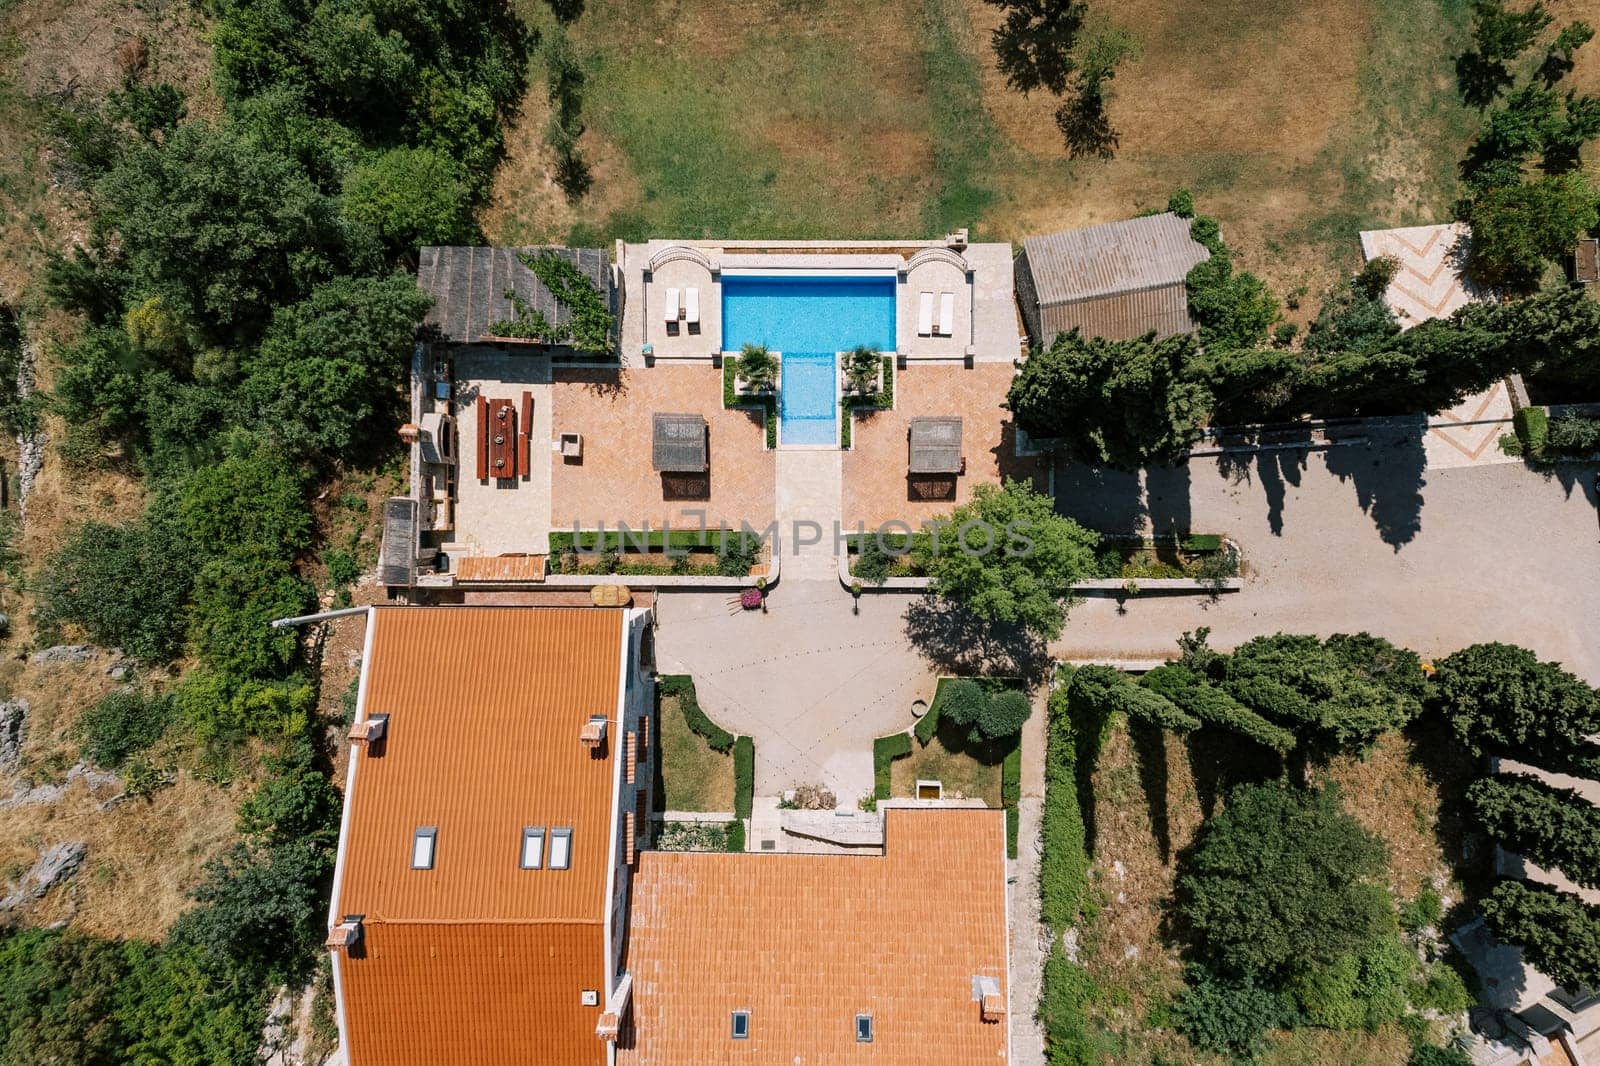 Ancient villa with a swimming pool in a green garden and sun loungers. Drone by Nadtochiy